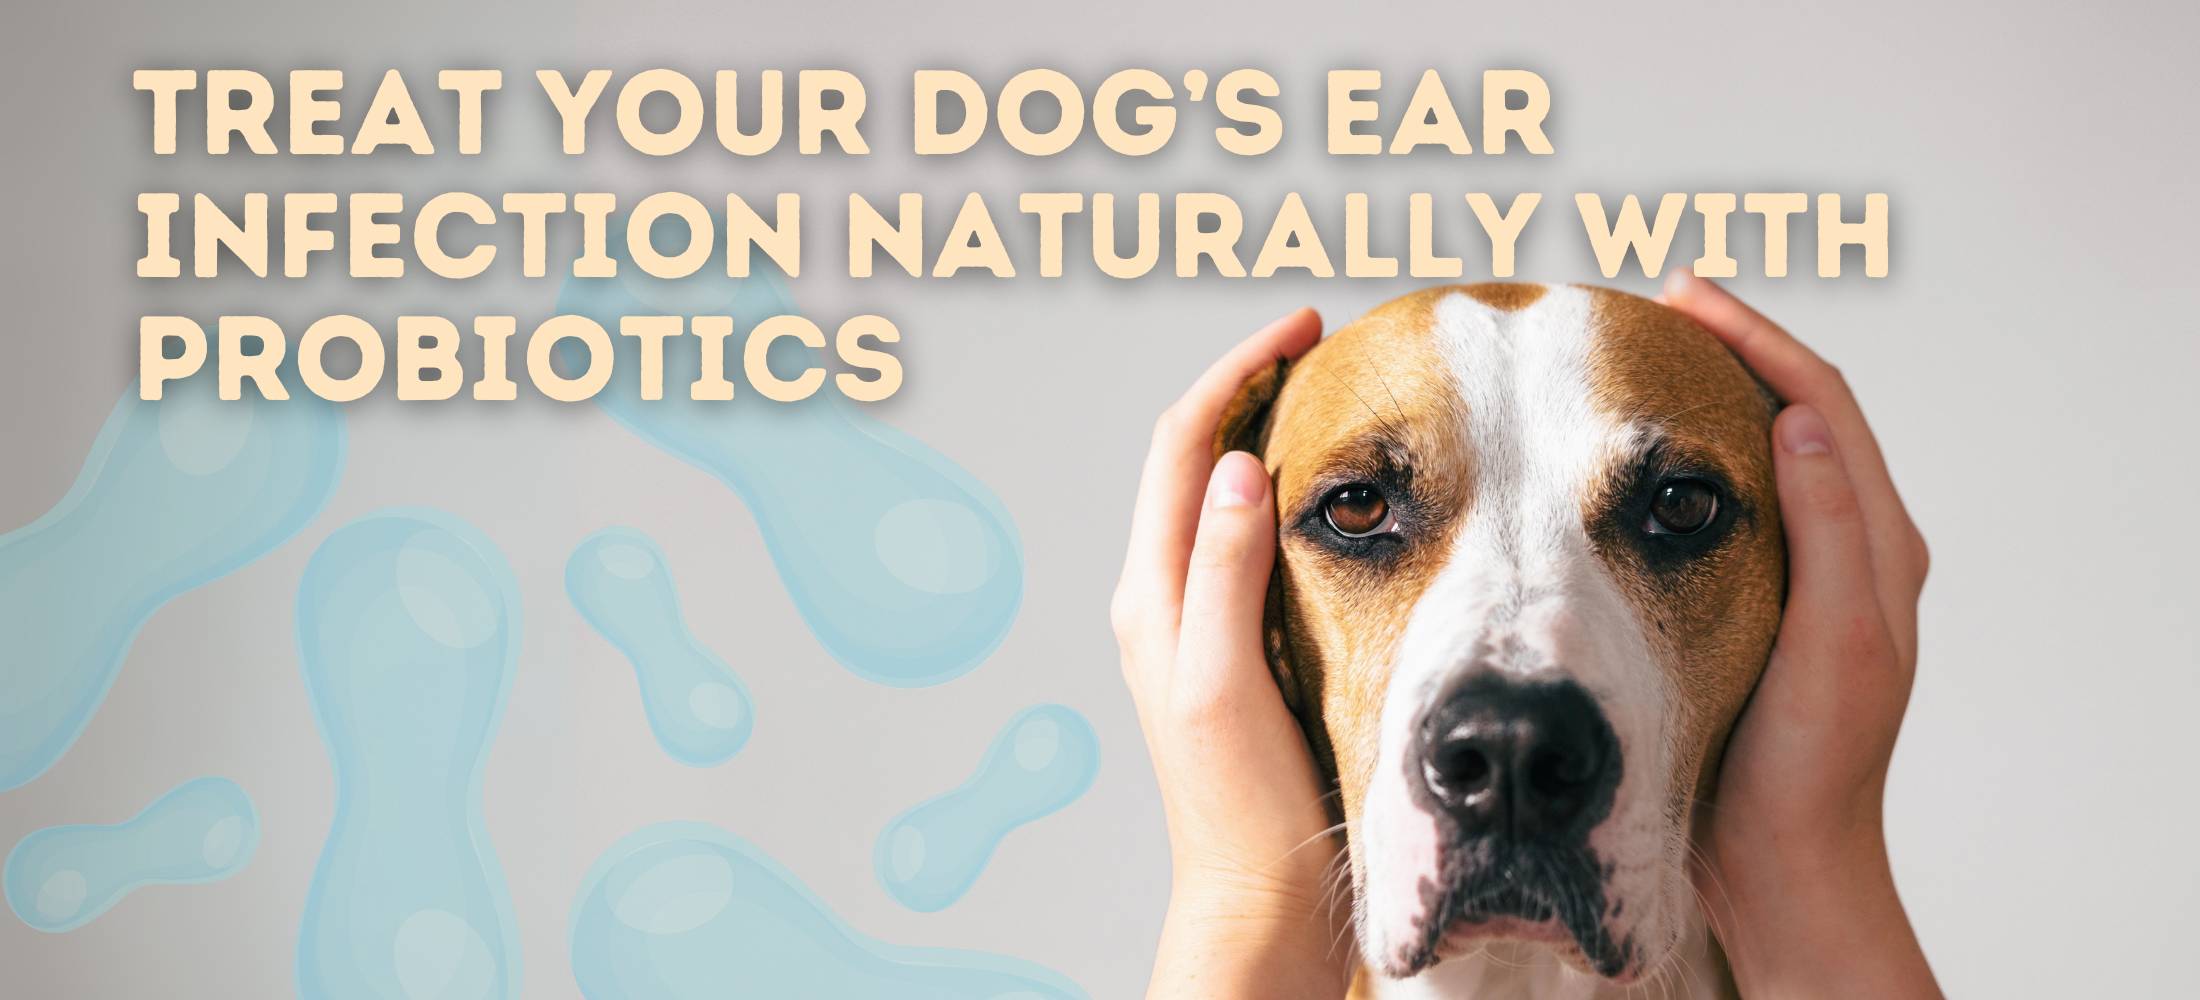 Wondering How to Treat Your Dog's Ear Infection Naturally? Consider Probiotics!